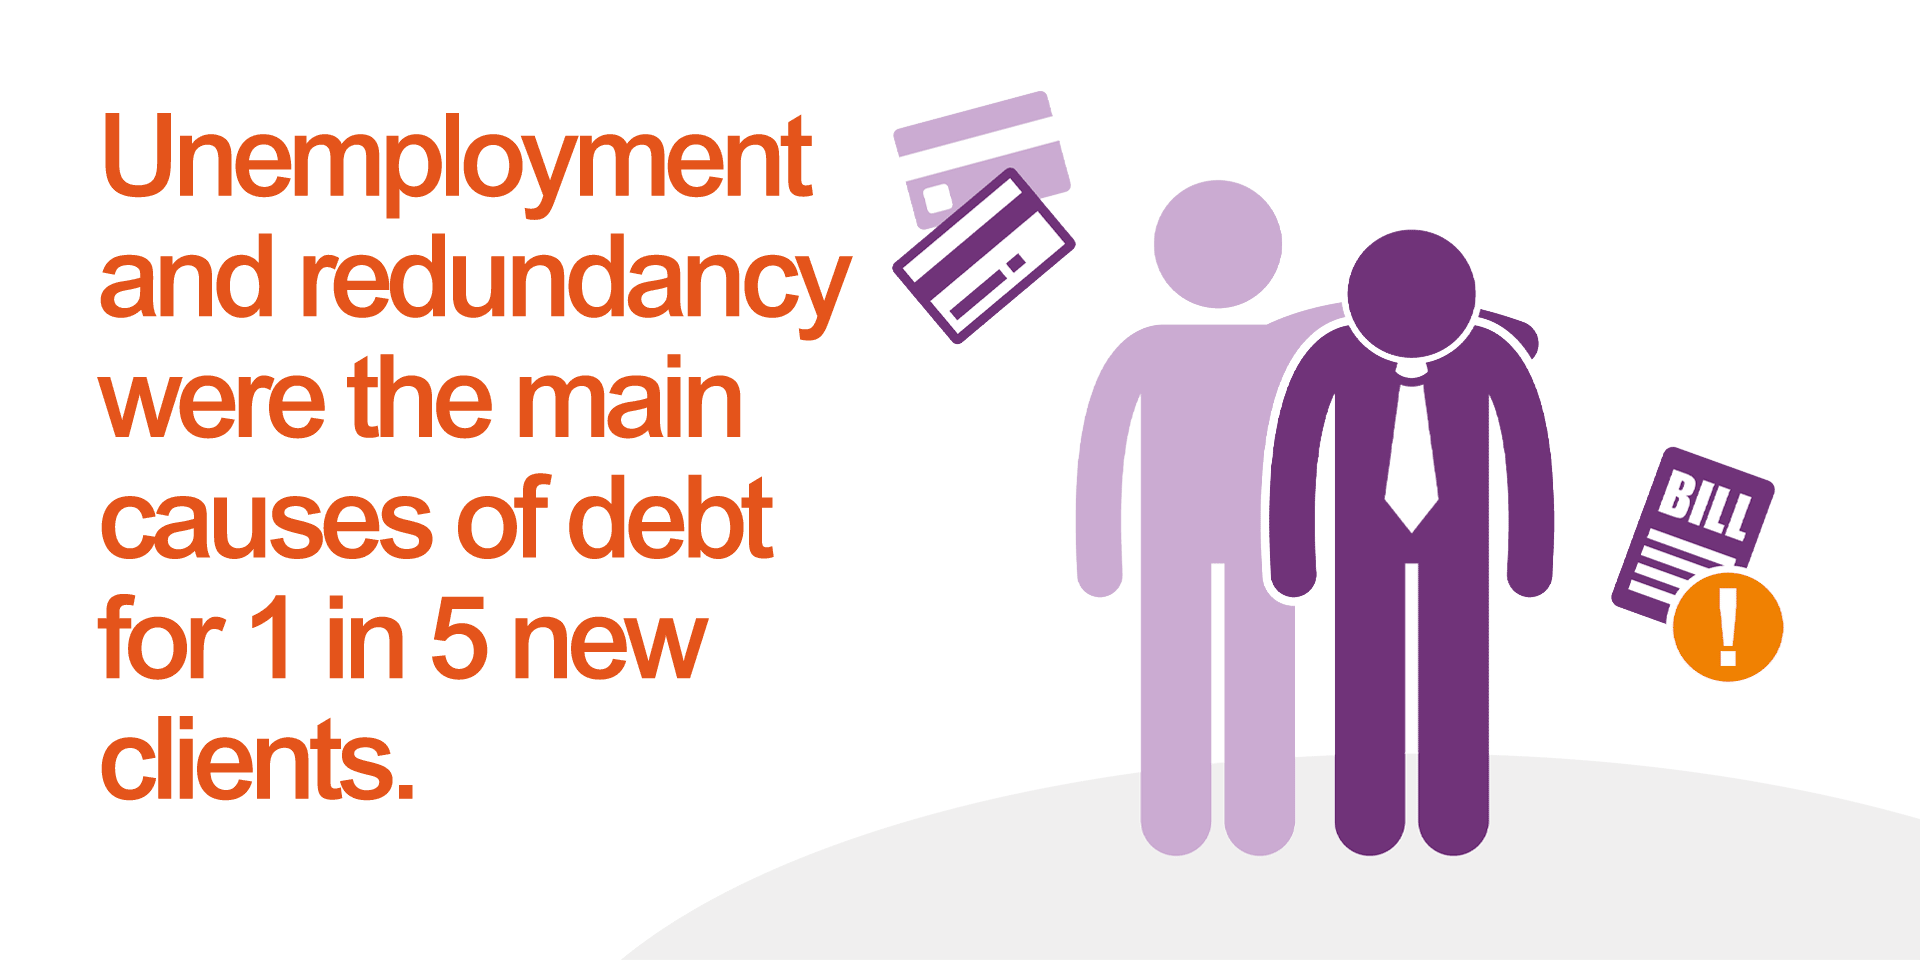 Unemployment and redundancy were the main causes of debt for new clients